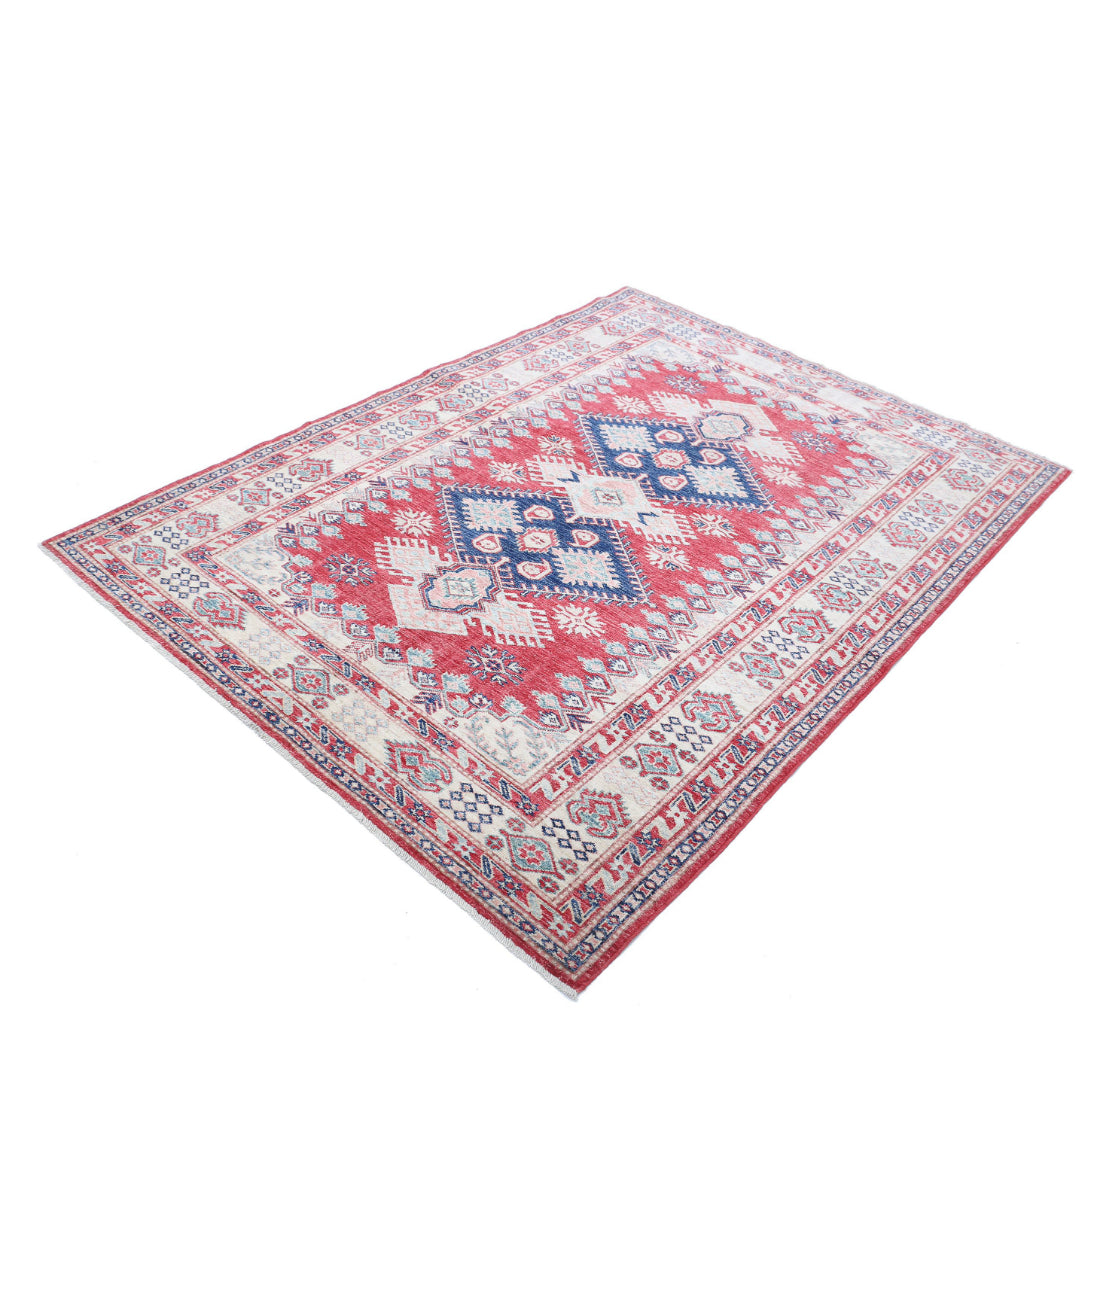 Hand Knotted Royal Kazak Wool Rug - 5'0'' x 6'7'' 5'0'' x 6'7'' (150 X 198) / Red / Ivory